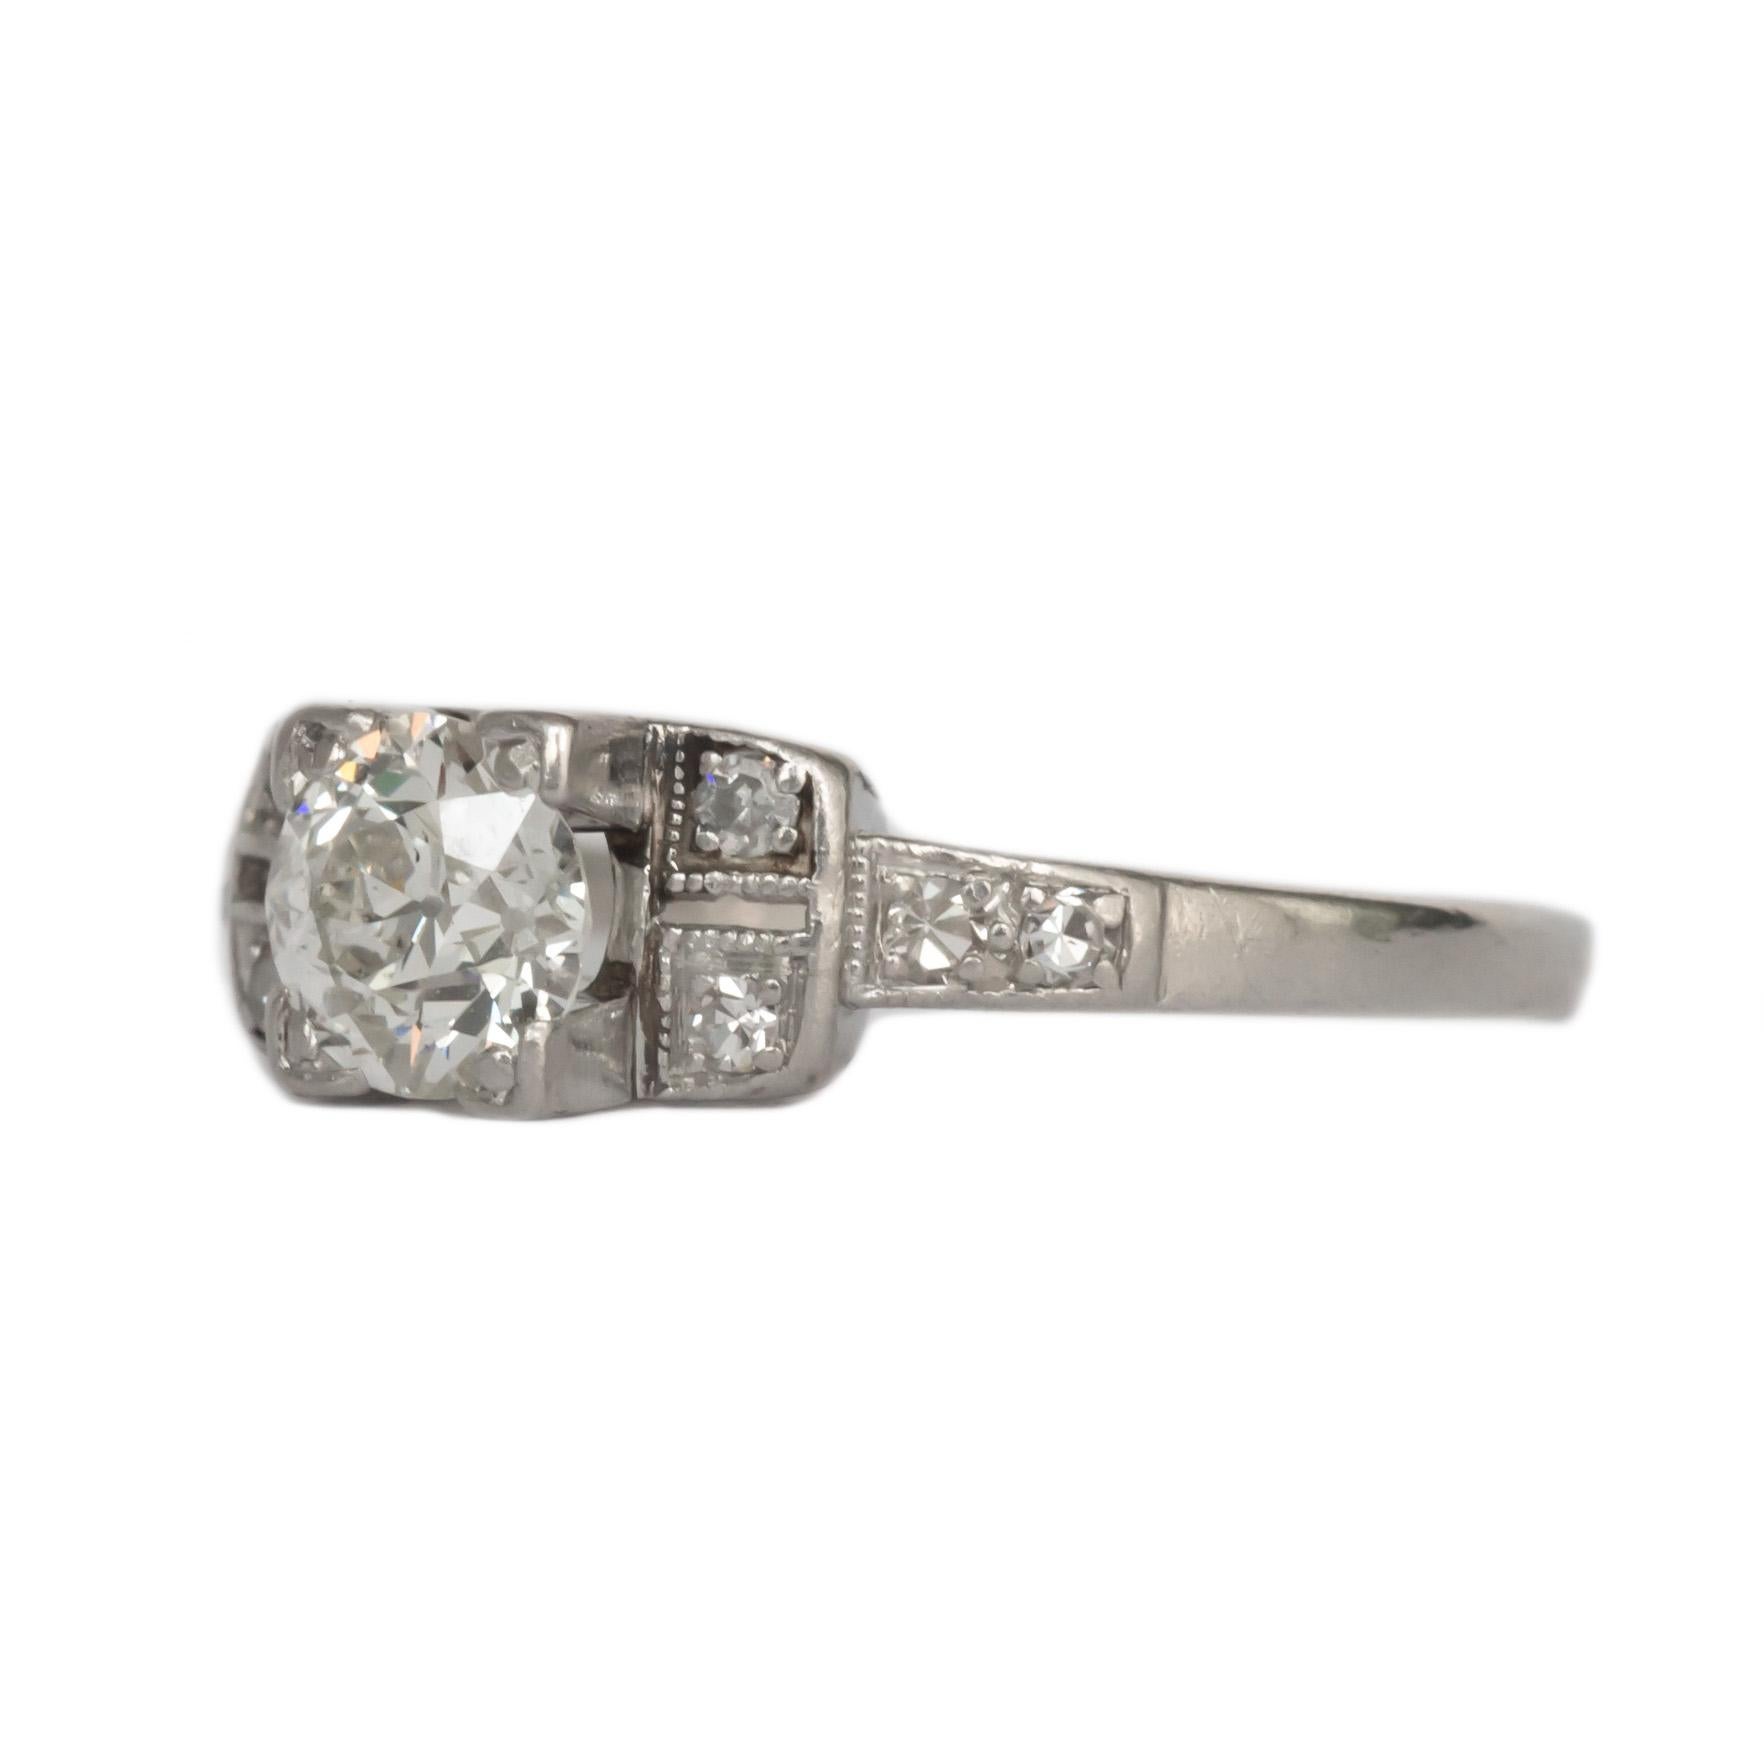 Ring Size: 4.35
Metal Type: Platinum
Weight: 2.6 grams

Center Diamond Details
Shape: Old European Brilliant 
Carat Weight: .52carat
Color: I
Clarity: SI2

Side Stone Details: 
Shape: Antique Single Cut 
Total Carat Weight: .10 carat, total